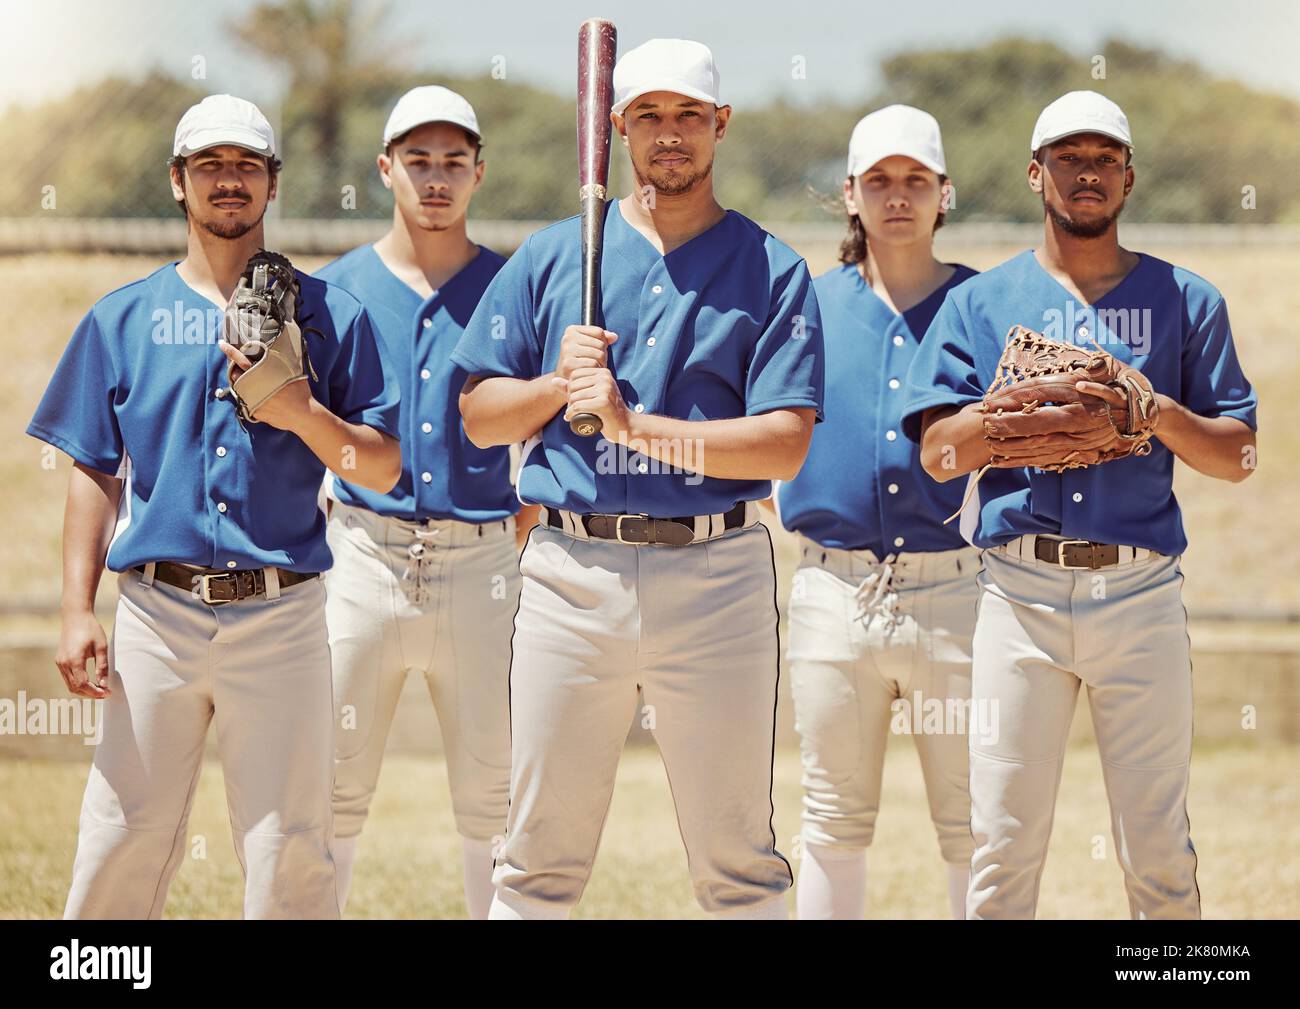 Sports, team and baseball portrait by sport people standing in power, support and fitness training on baseball field. Softball, diversity and Stock Photo